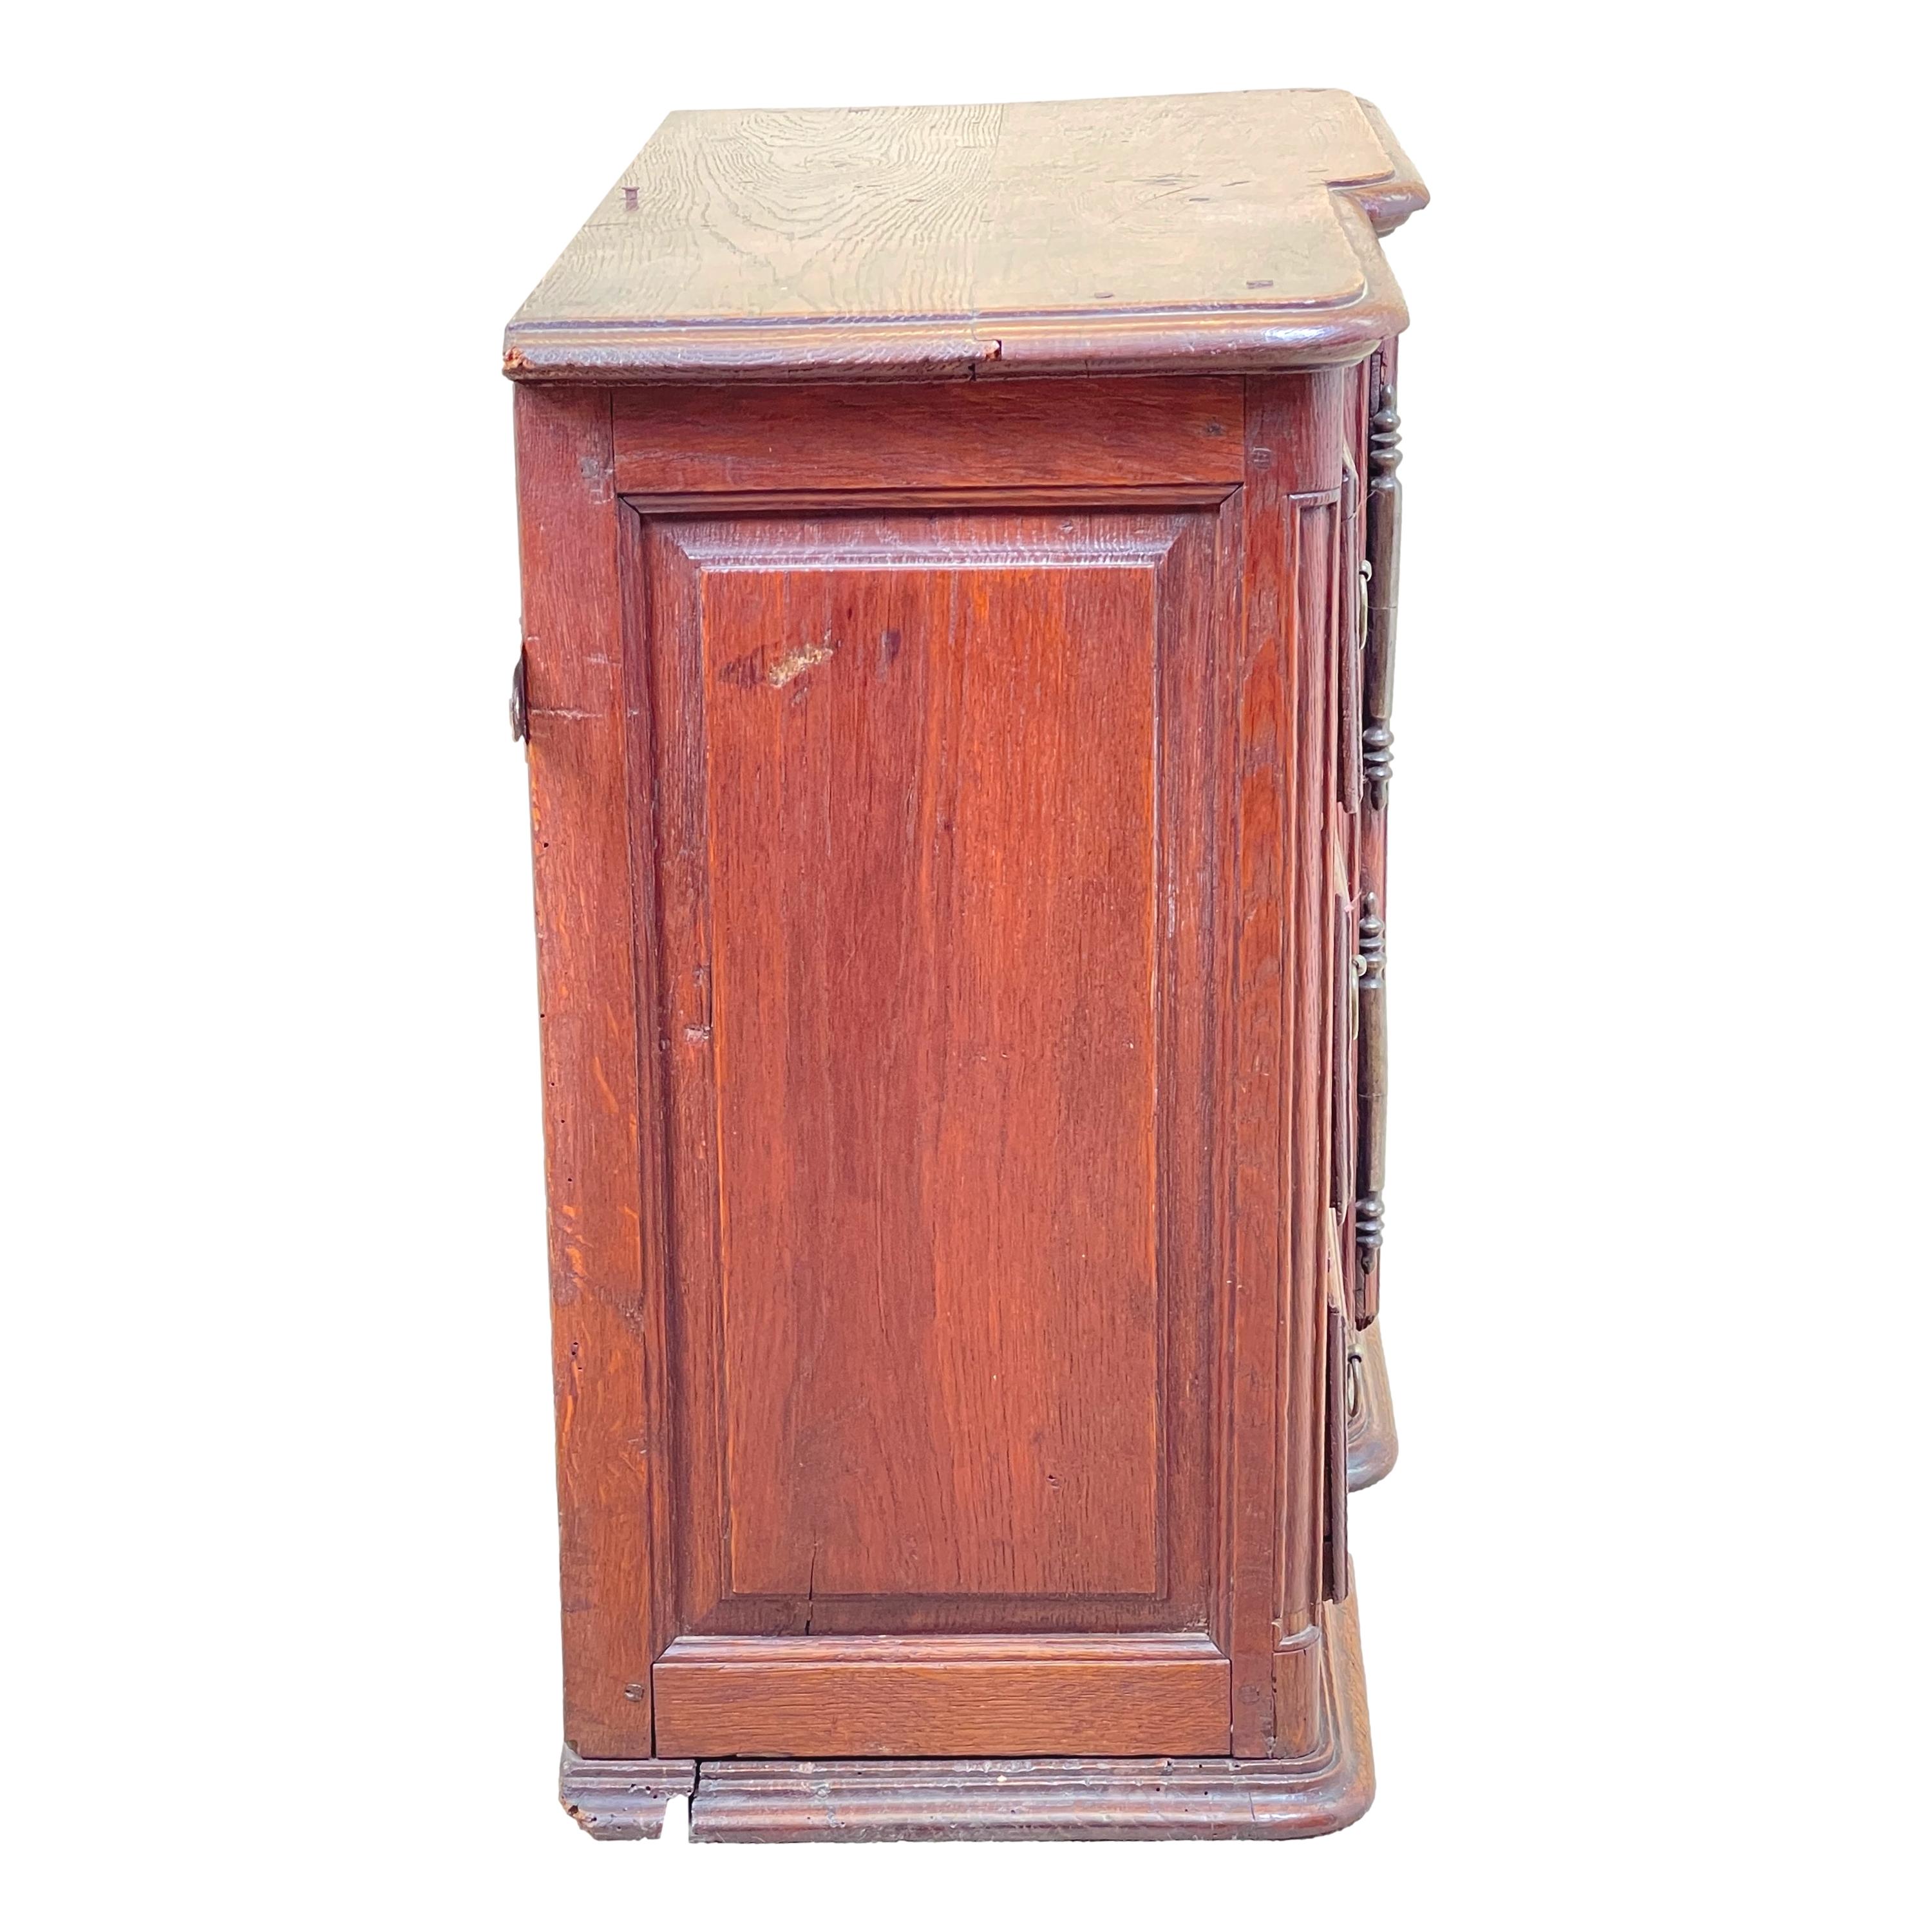 A rare mid 19th century french oak wall hanging cupboard, of unusual design and real charm, with arched panelled door alonside three panelled drawers.


This charming mid 19th century French provincial wall hanging cupboard really is quite